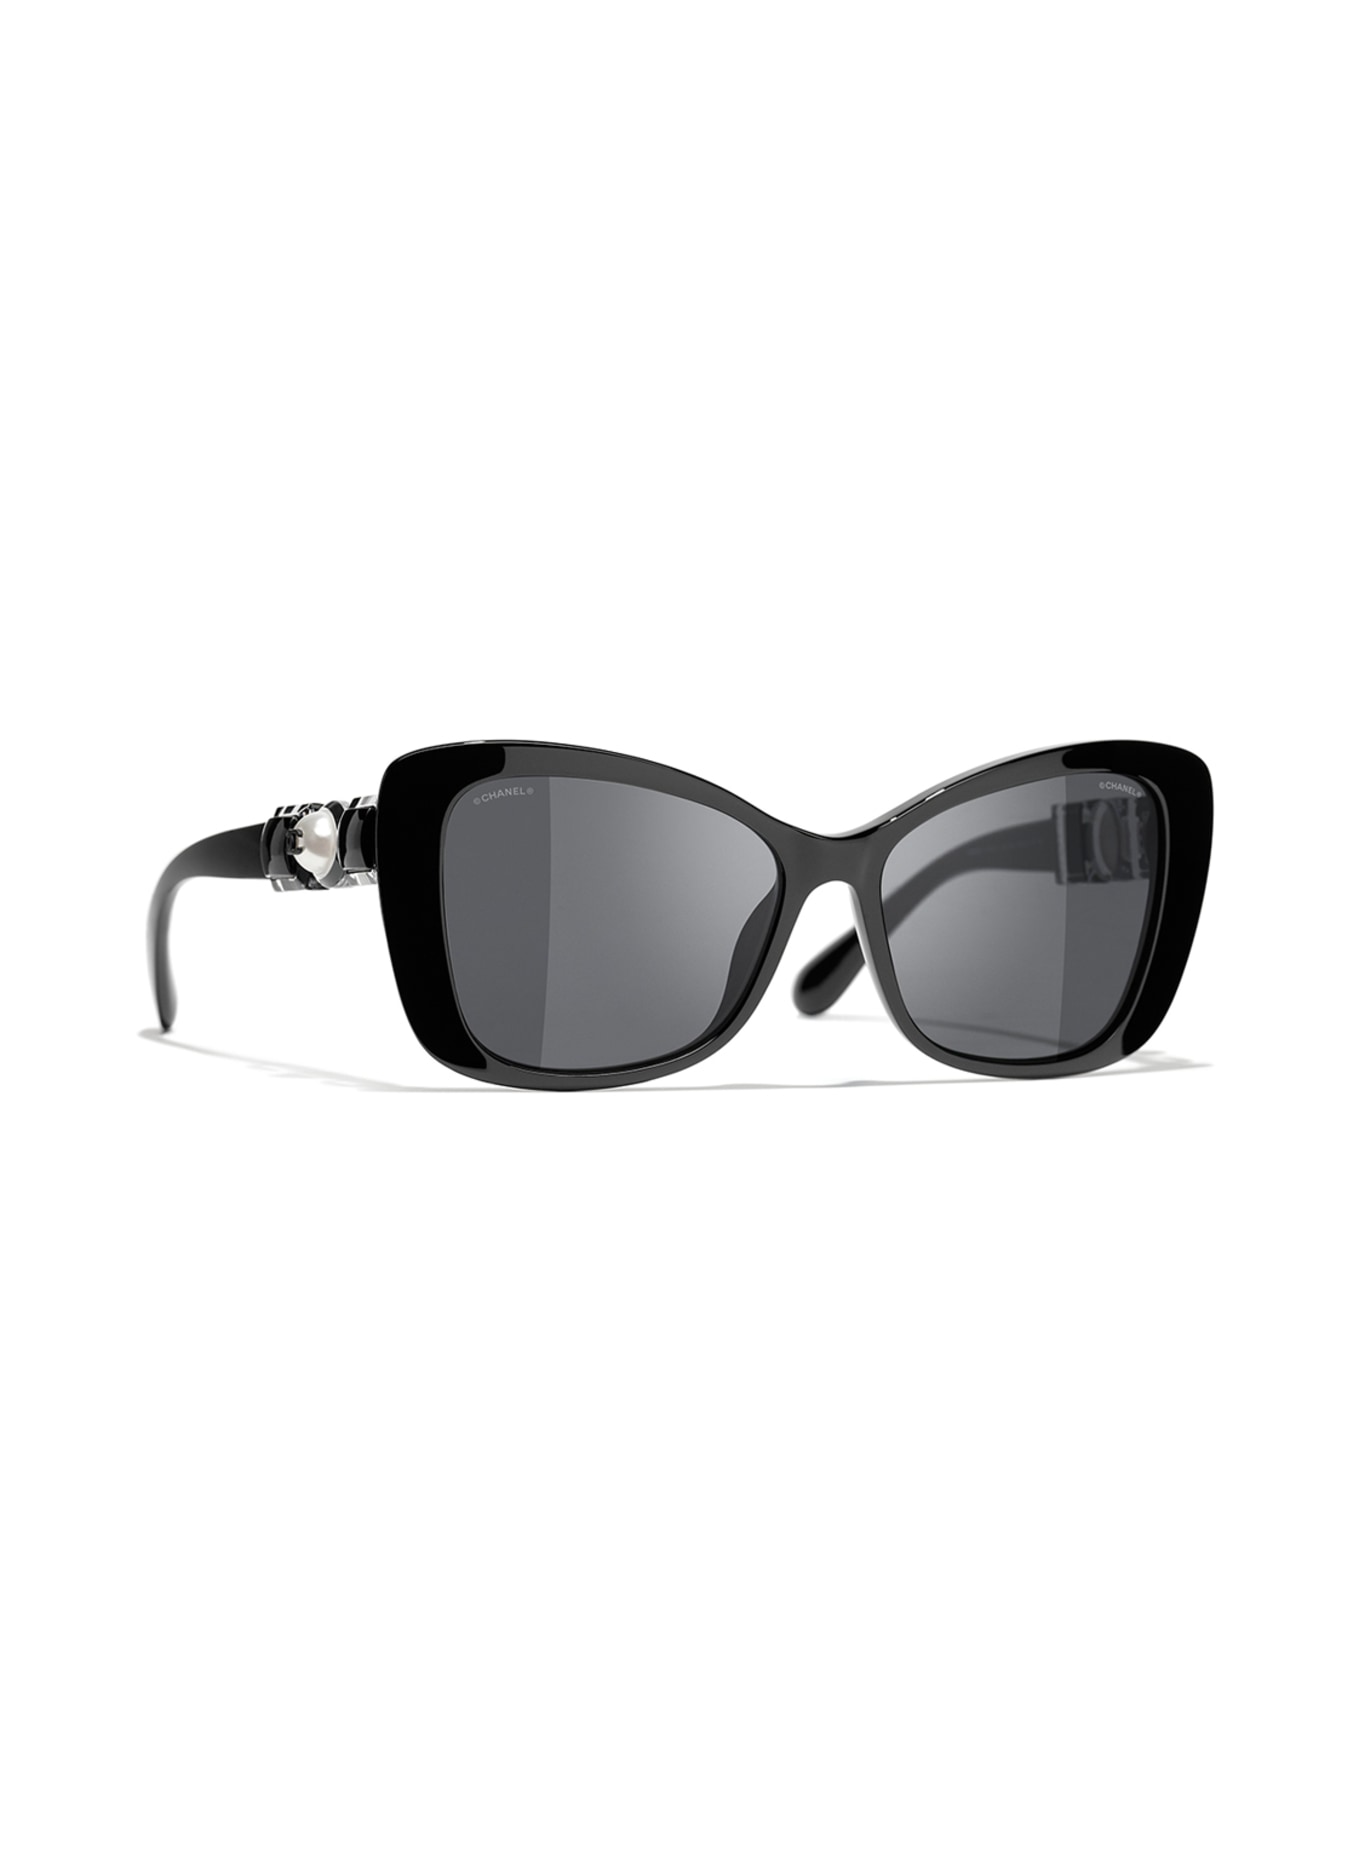 CHANEL Butterfly sunglasses in c501s4 - black/gray